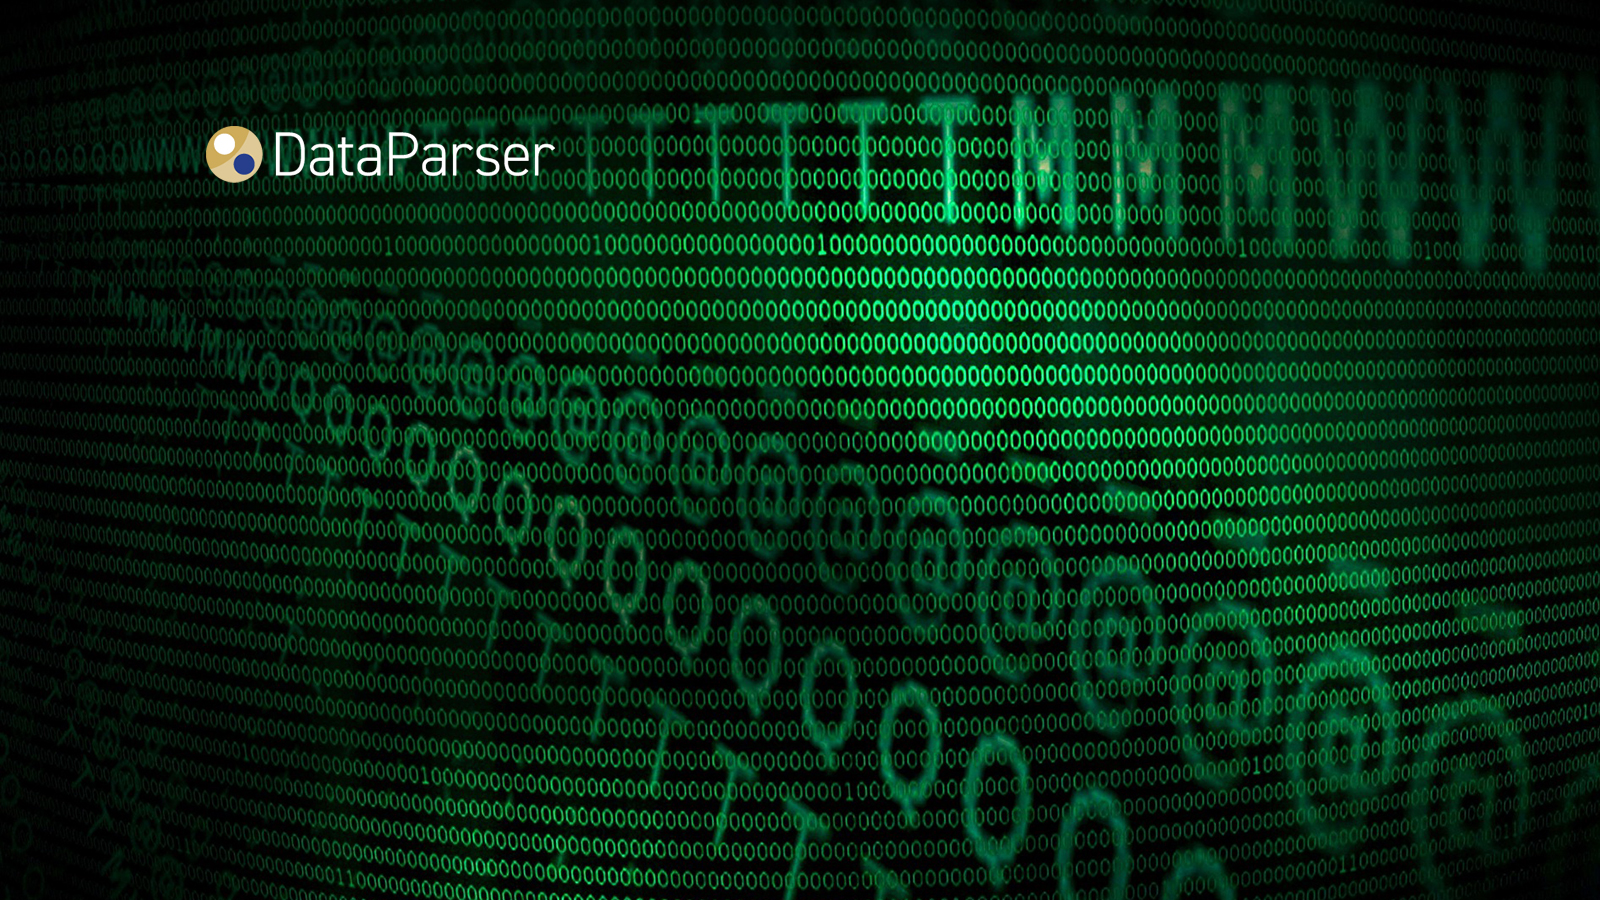 DataParser now supports Movius MultiLine for SMS text and WhatsApp data archiving